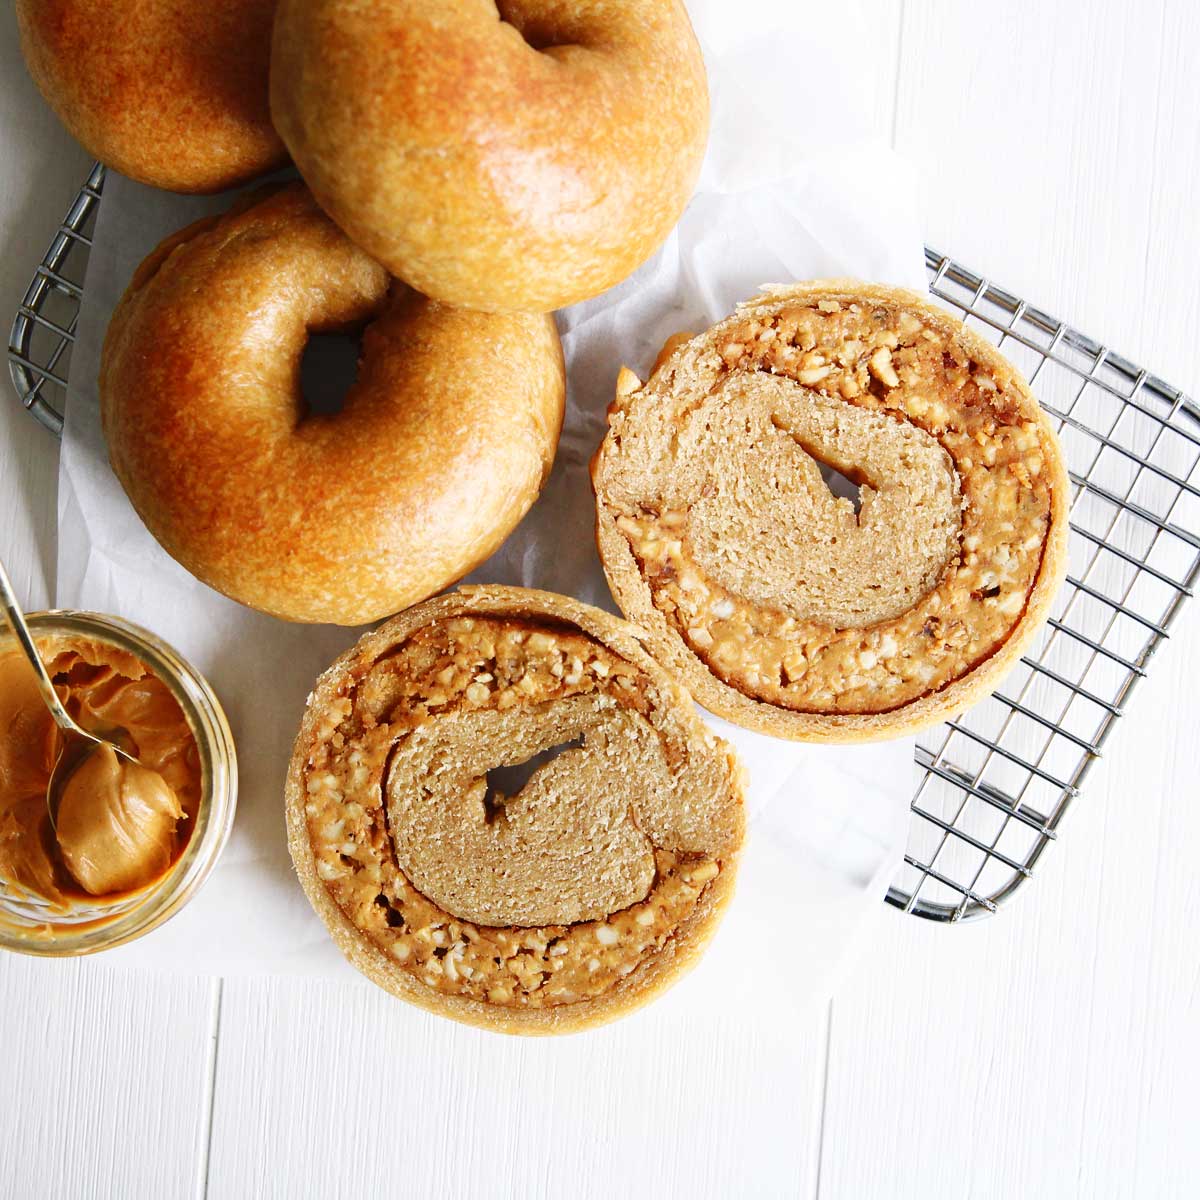 I Stuffed a Bagel With Peanut Butter! High Protein PB Stuffed Bagels Recipe - Peanut Butter Snow Skin Mooncakes